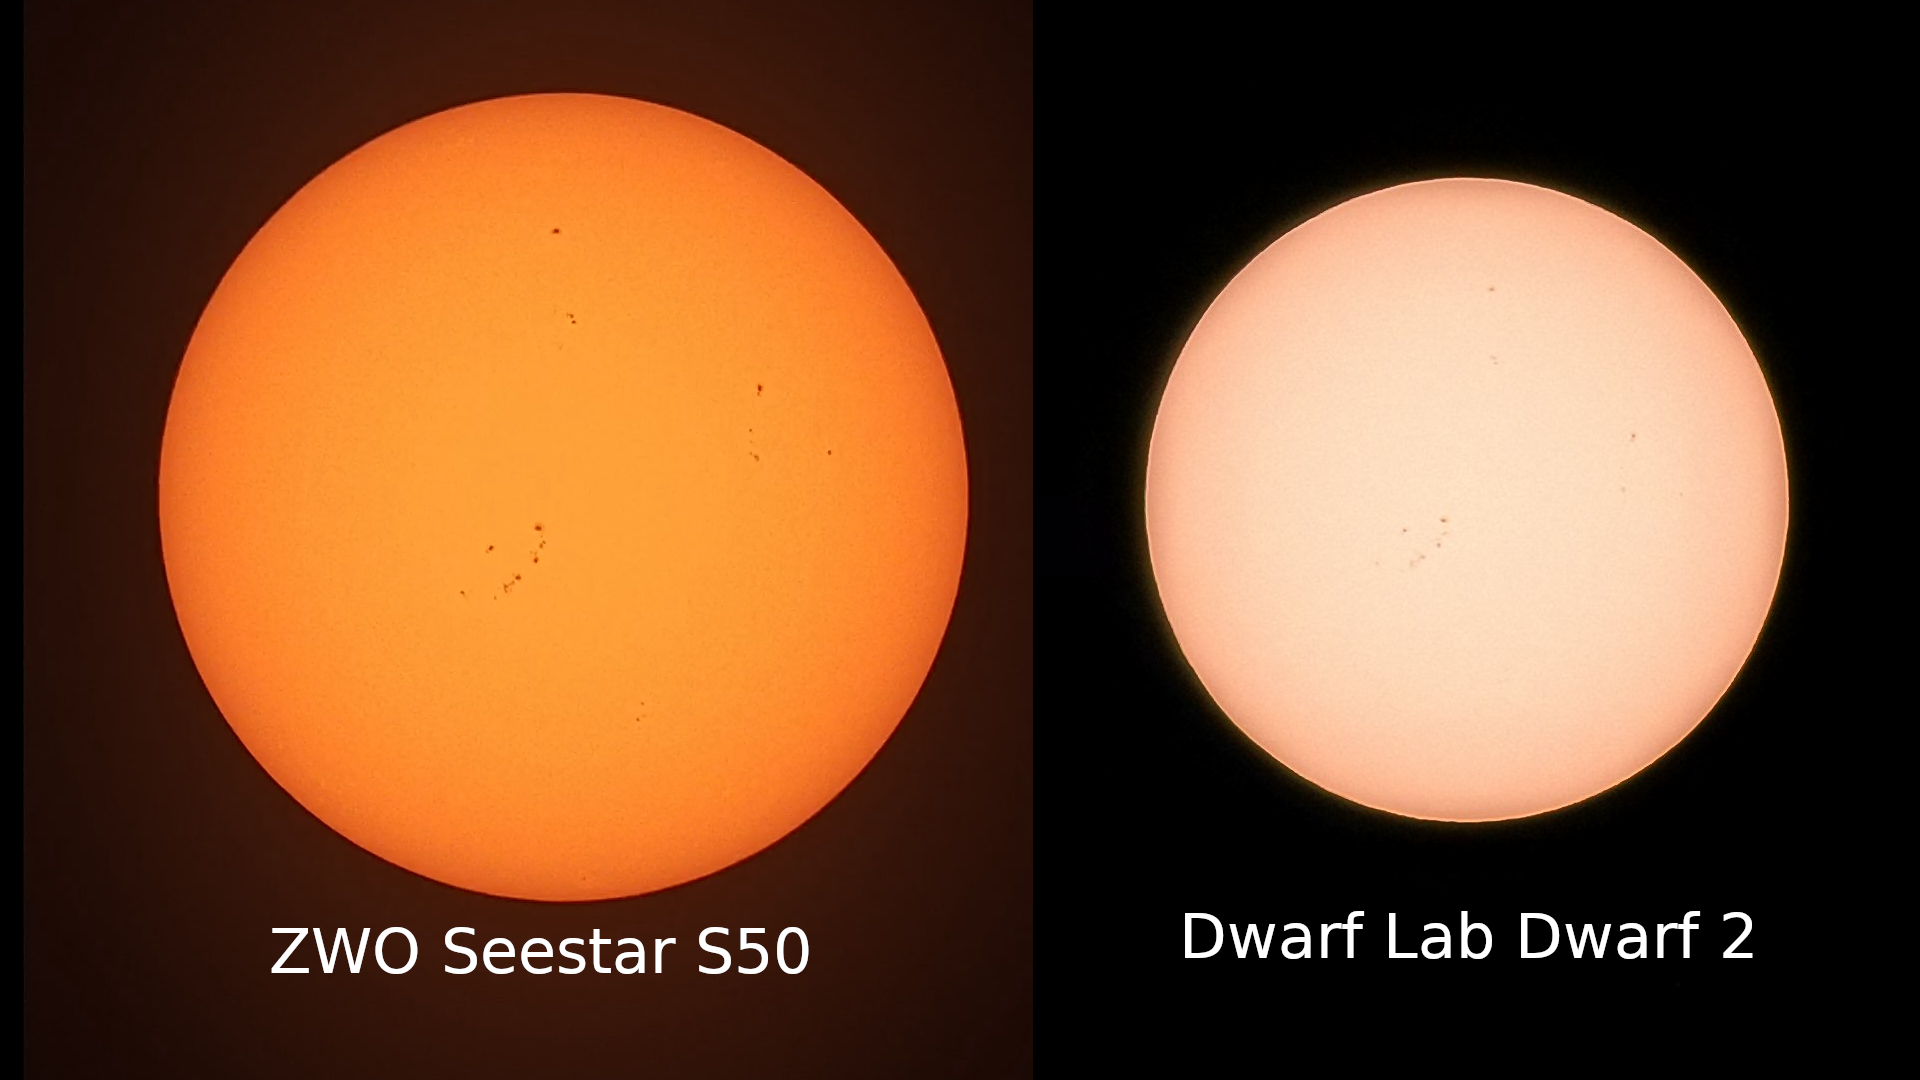 Side by side shots of the sun by both the Seestar S50 and Dwarf 2 smart telescopes.